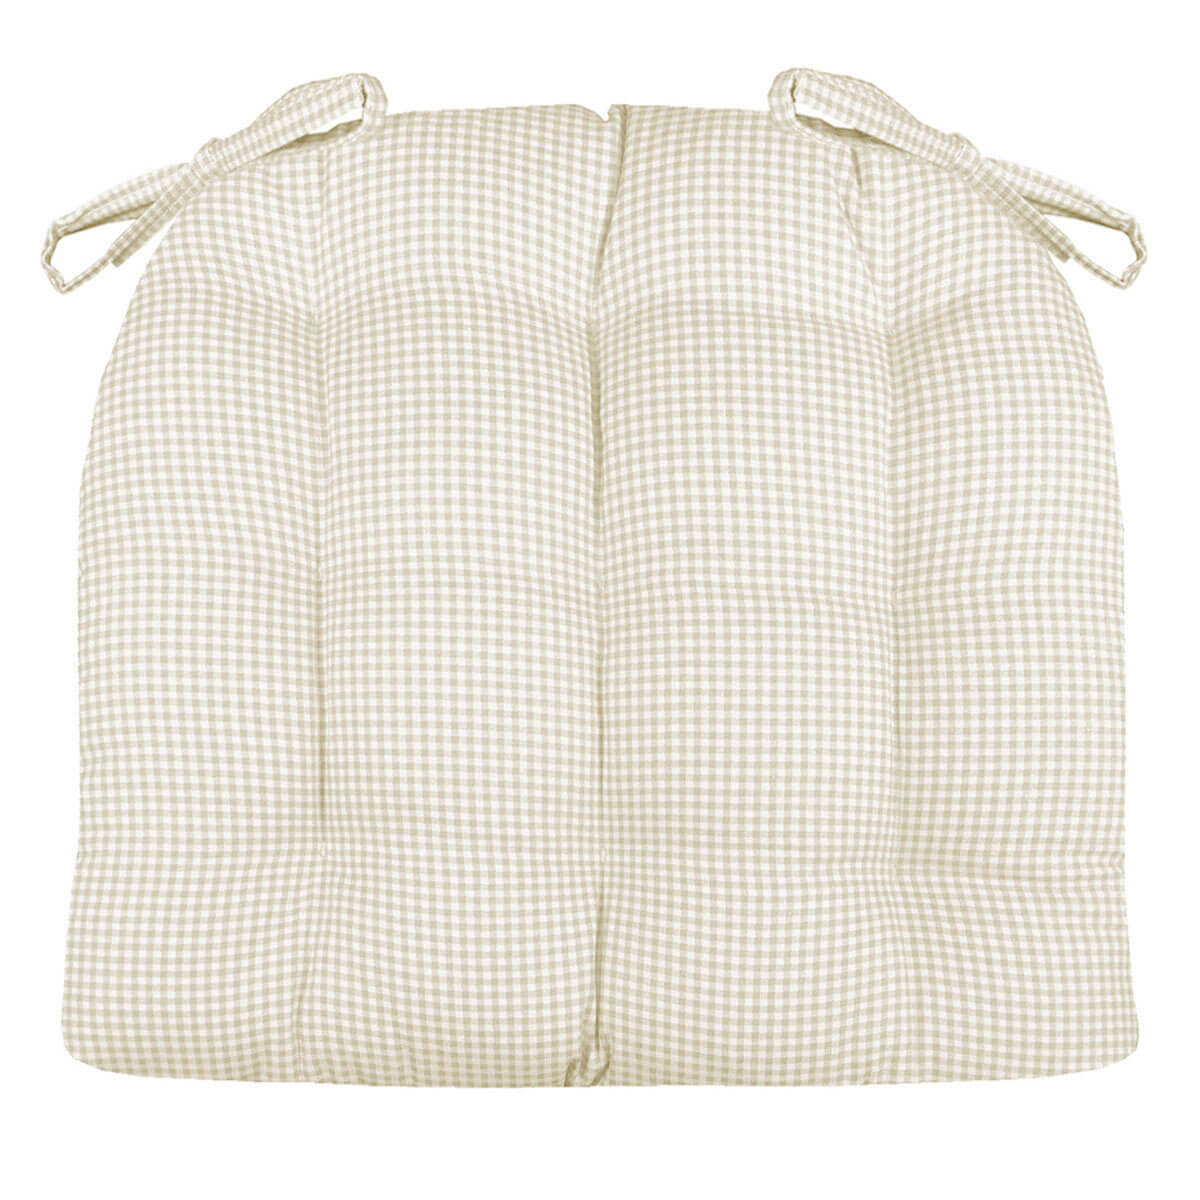 gingham check chair pads with ties made of 100% cotton fabric  in natural